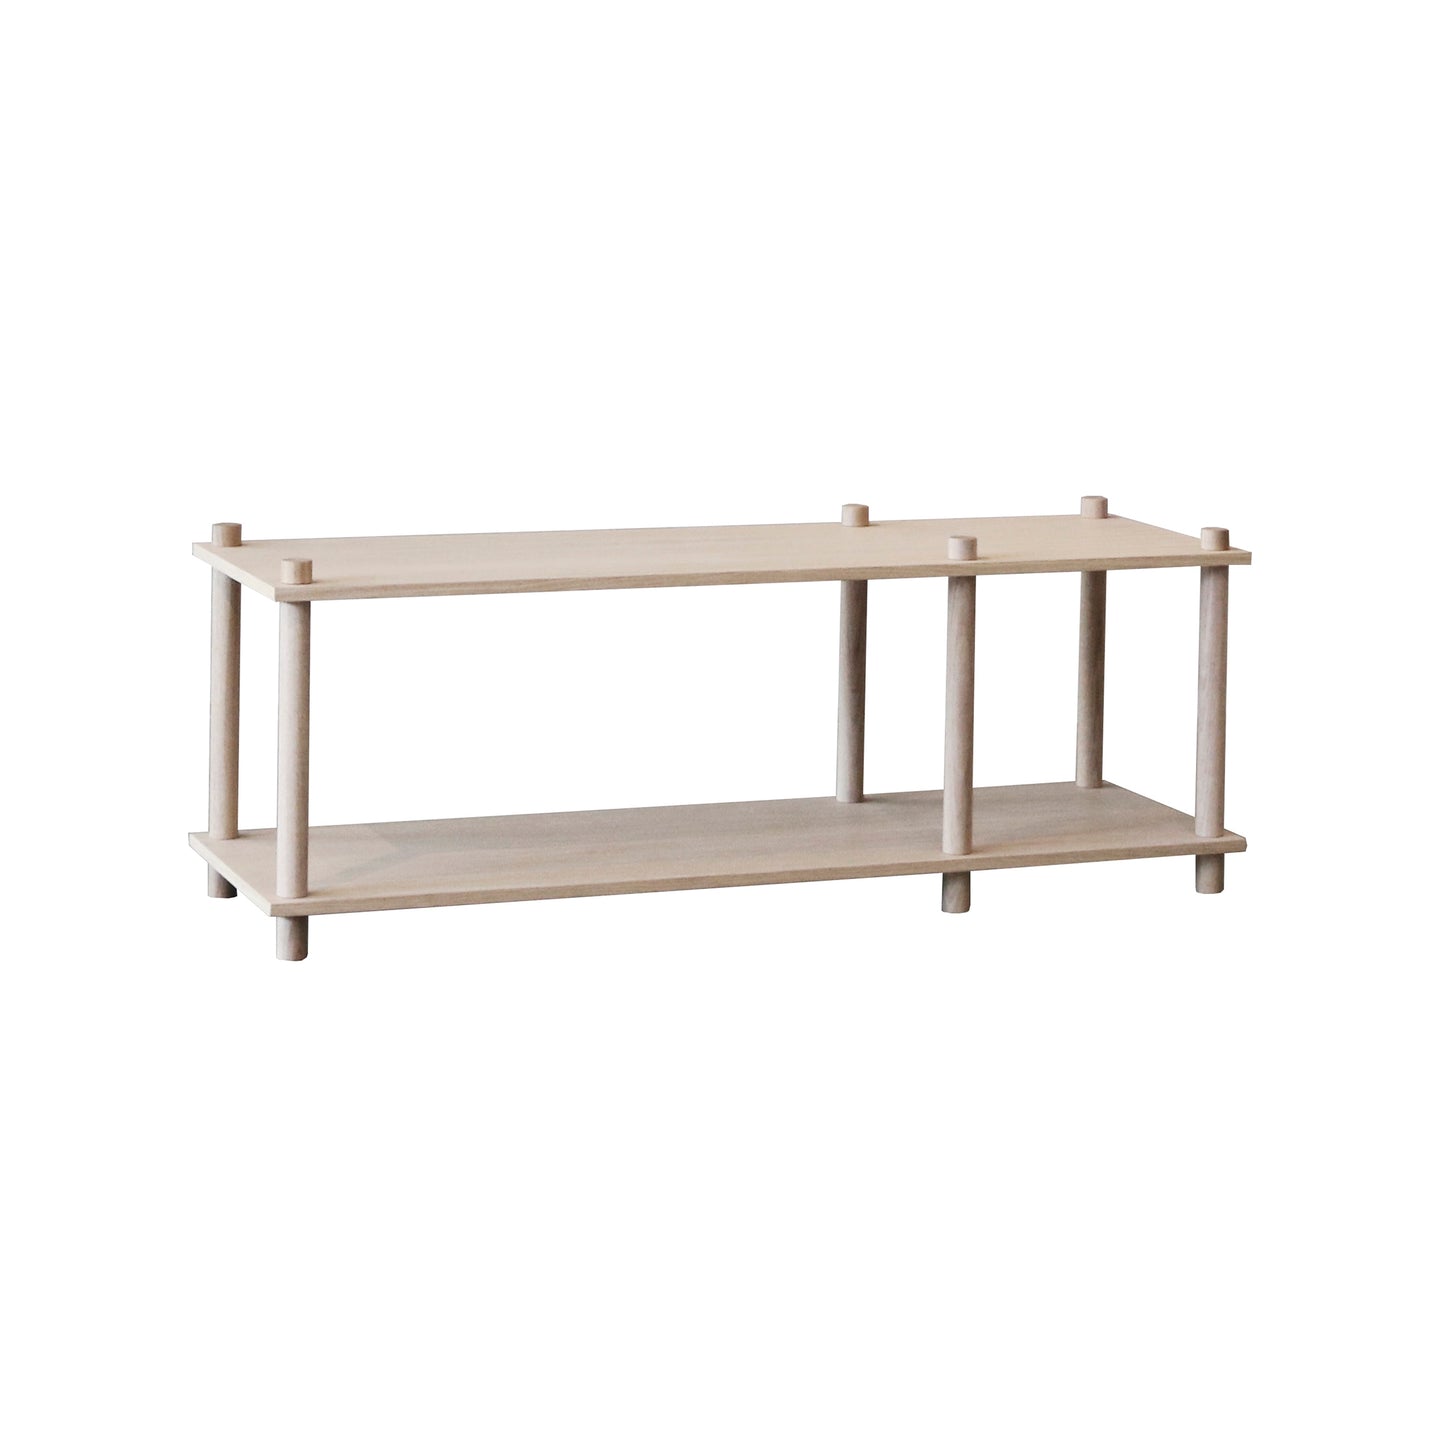 Elevate Shelving - System 1 by Woud